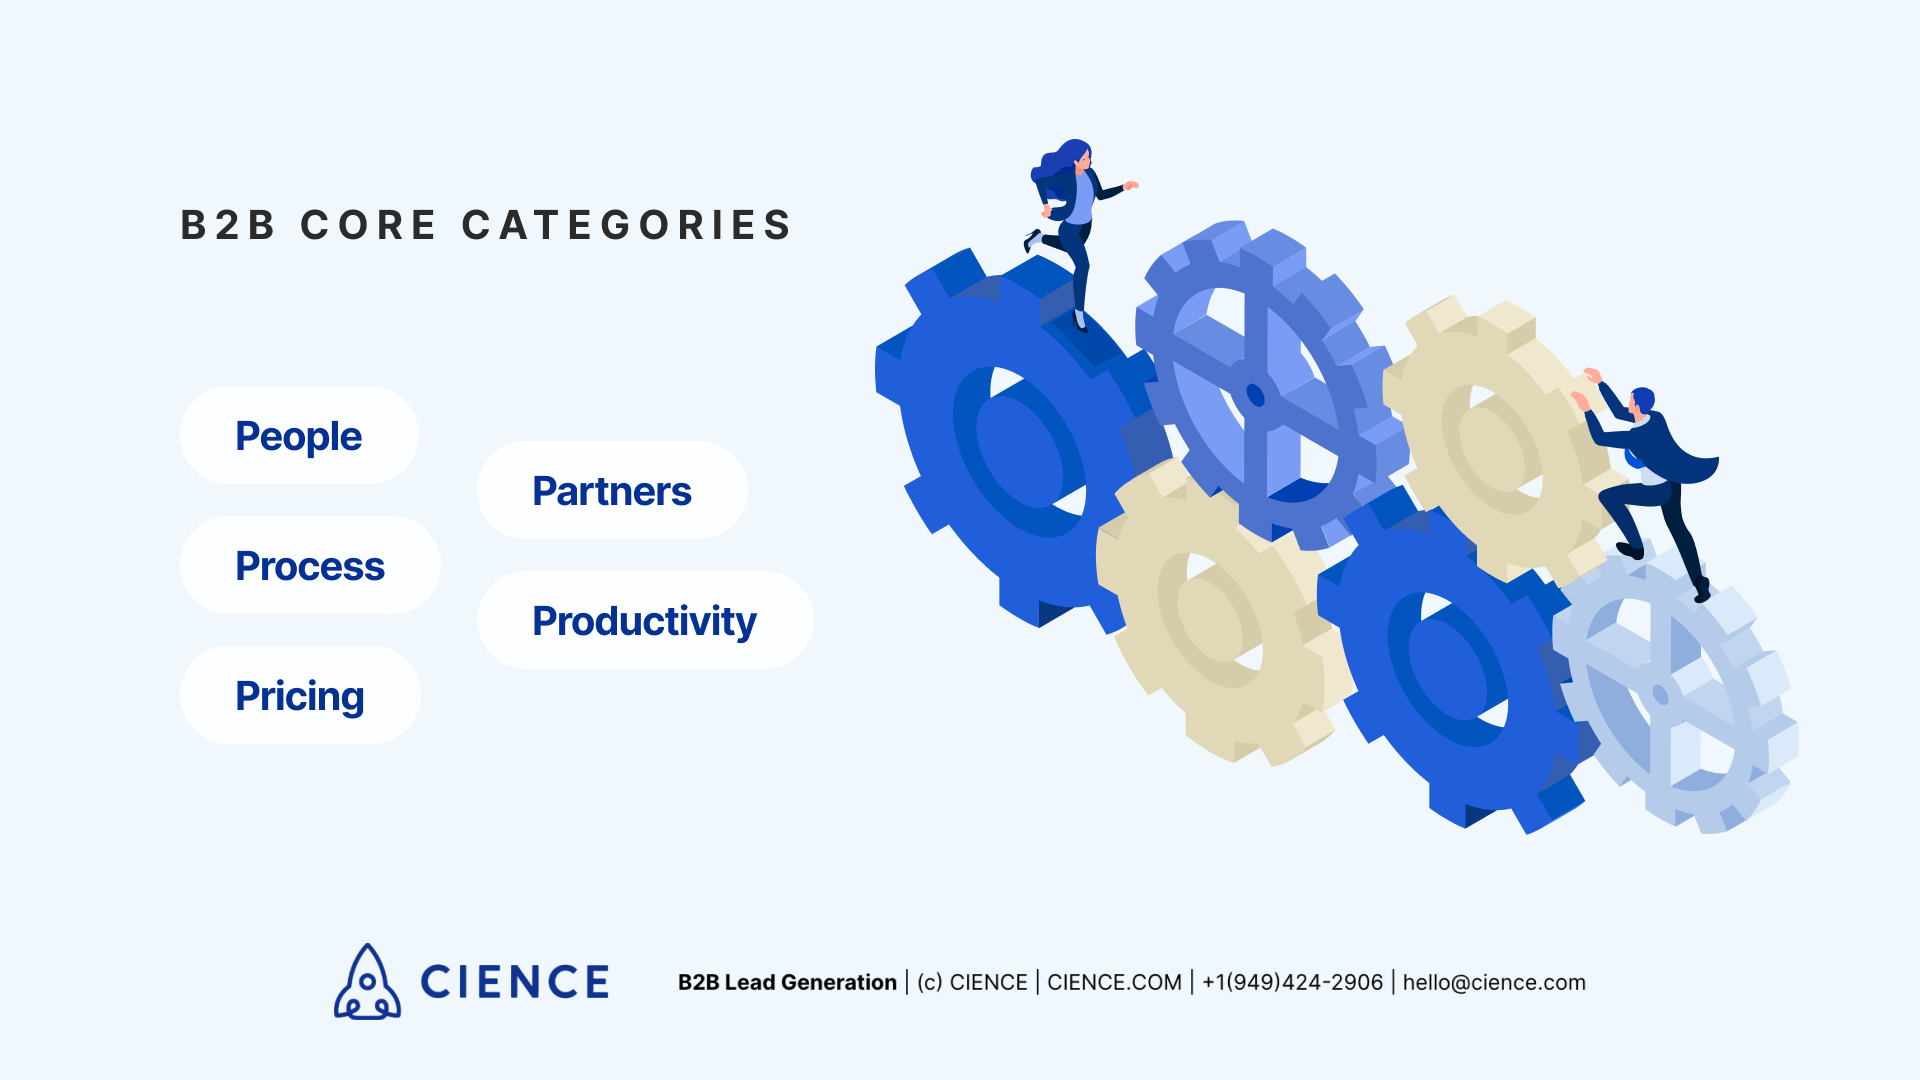 B2B Core Categories: People, Process, Pricing, Partners, Productivity